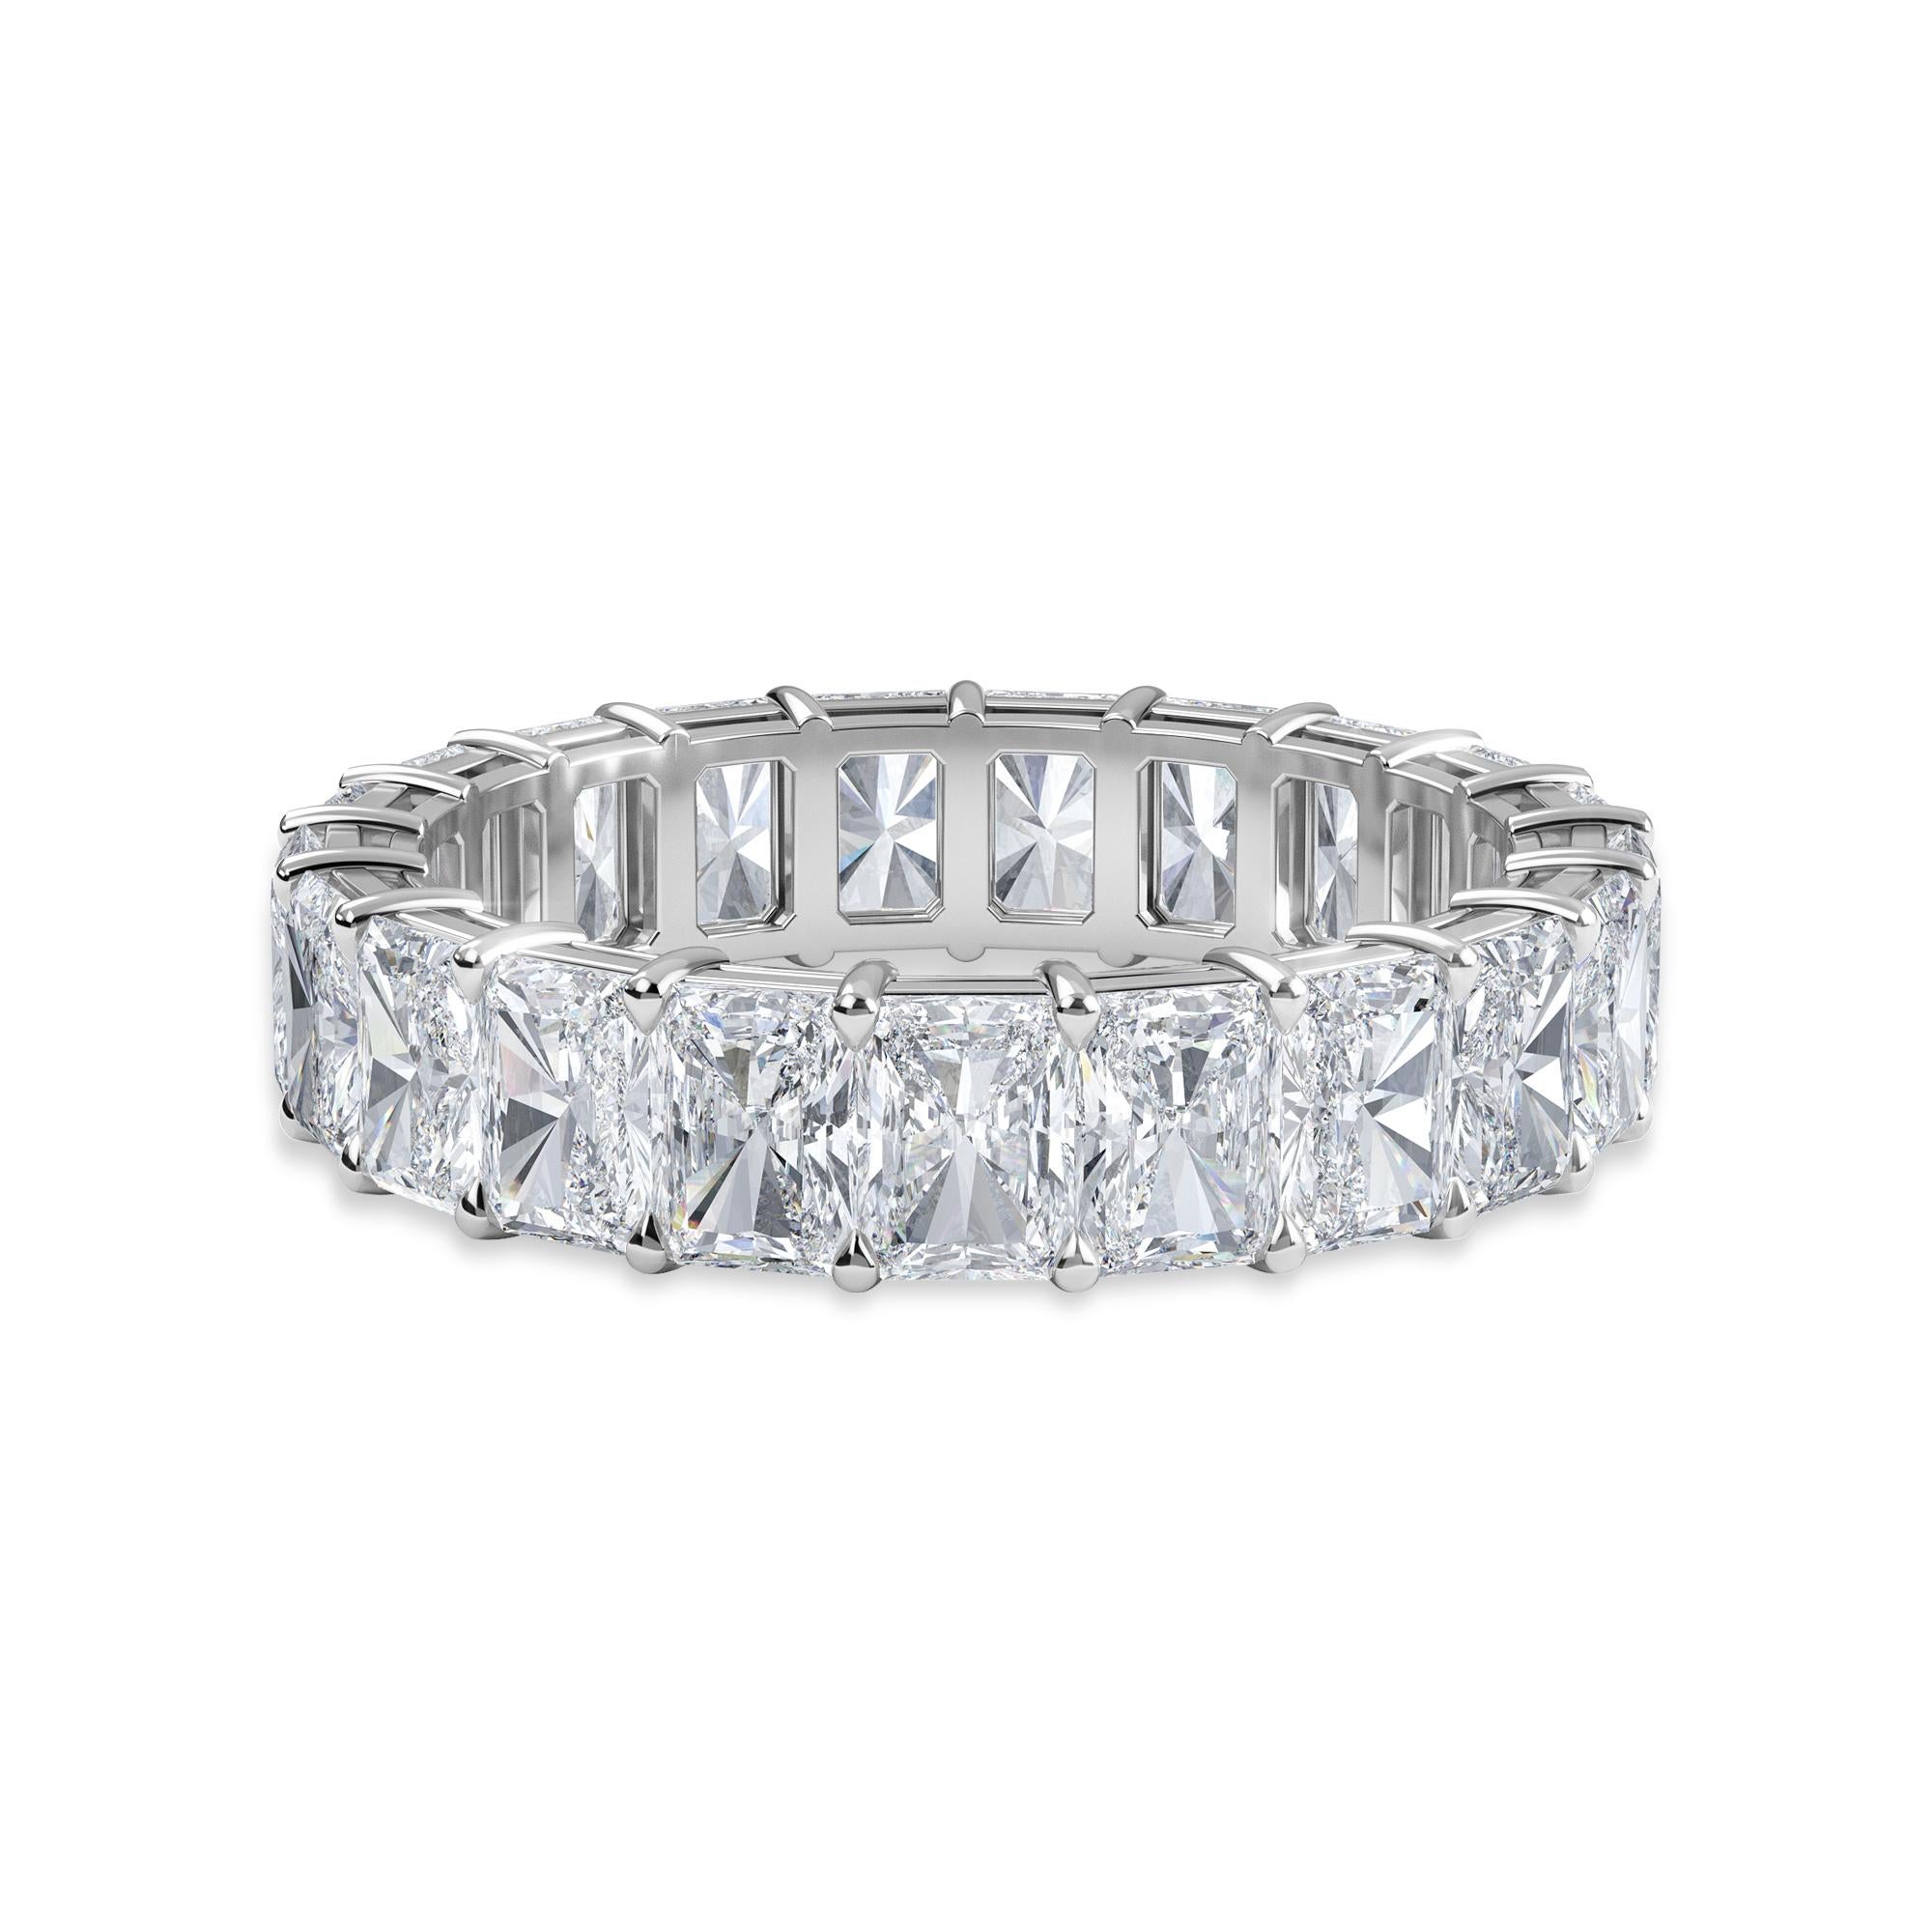 This Radiant Diamond Eternity Band features 21 Radiant Diamonds and has a Total Carat Weight of 5.58. The Diamonds are H Color, VS Clarity, and are set in a Platinum Shared Prong setting in a finger size 6.25. 